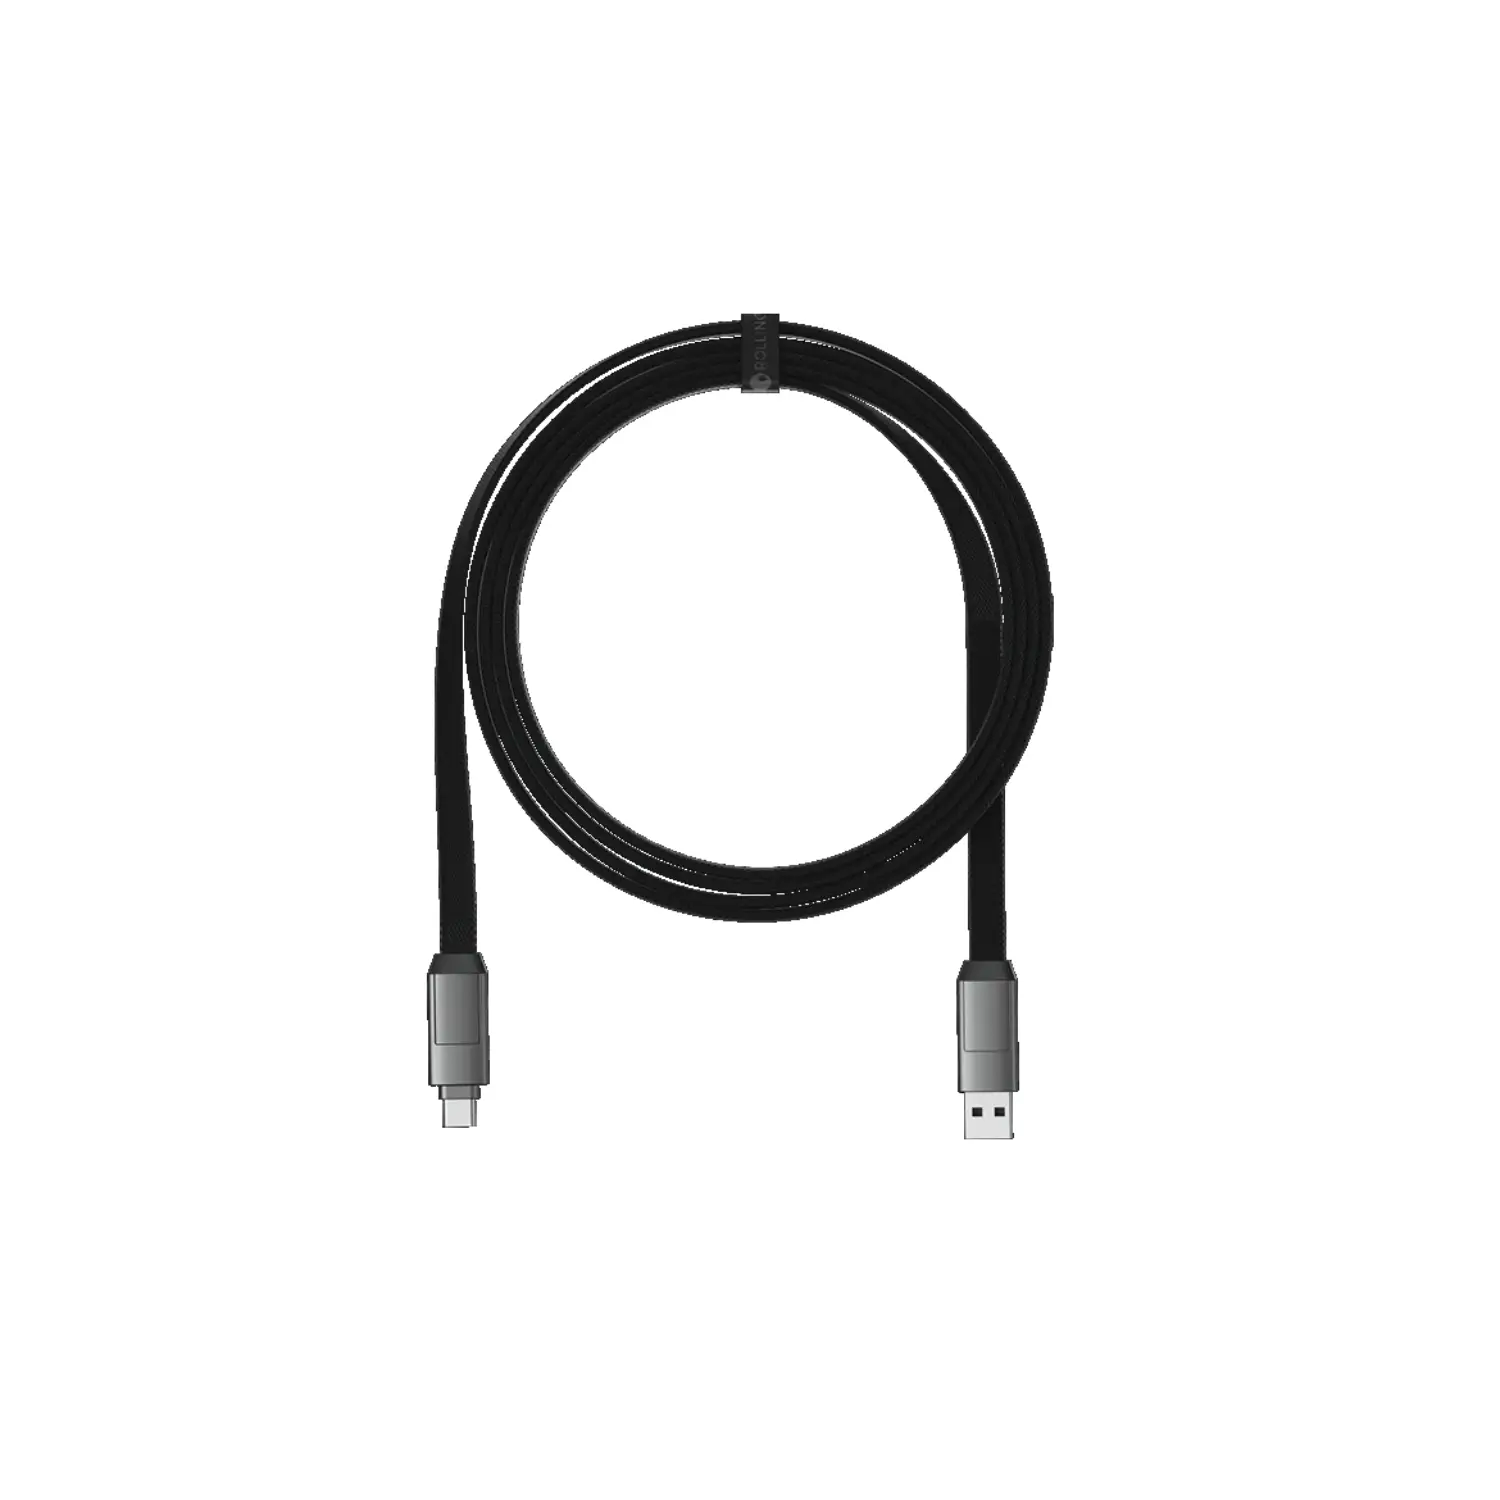 inCharge 6 MAX The Six-In-One Extra Long Cable for Home And Travel - Retail packaging